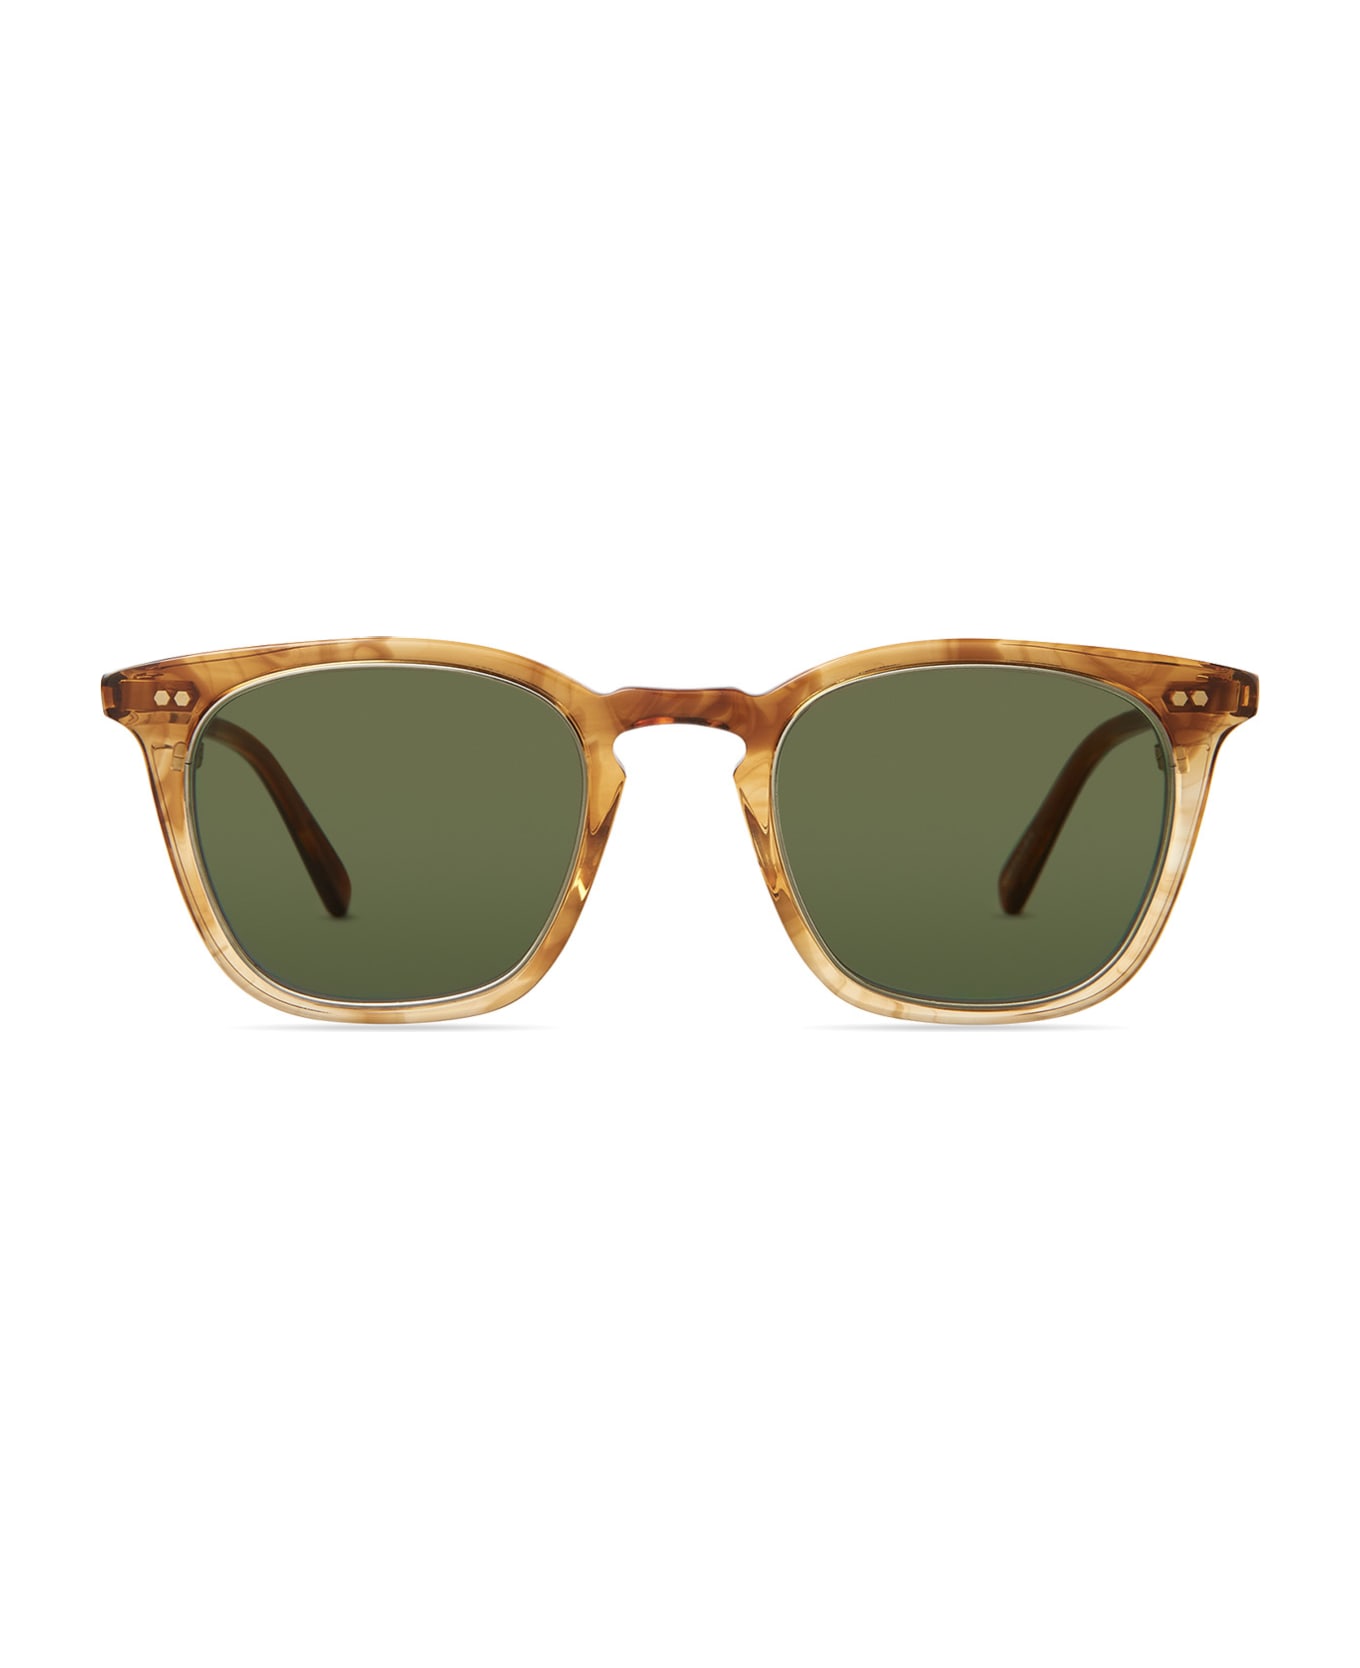 Mr. Leight Getty Ii S Marbled Rye-antique Gold Sunglasses - Marbled Rye-Antique Gold